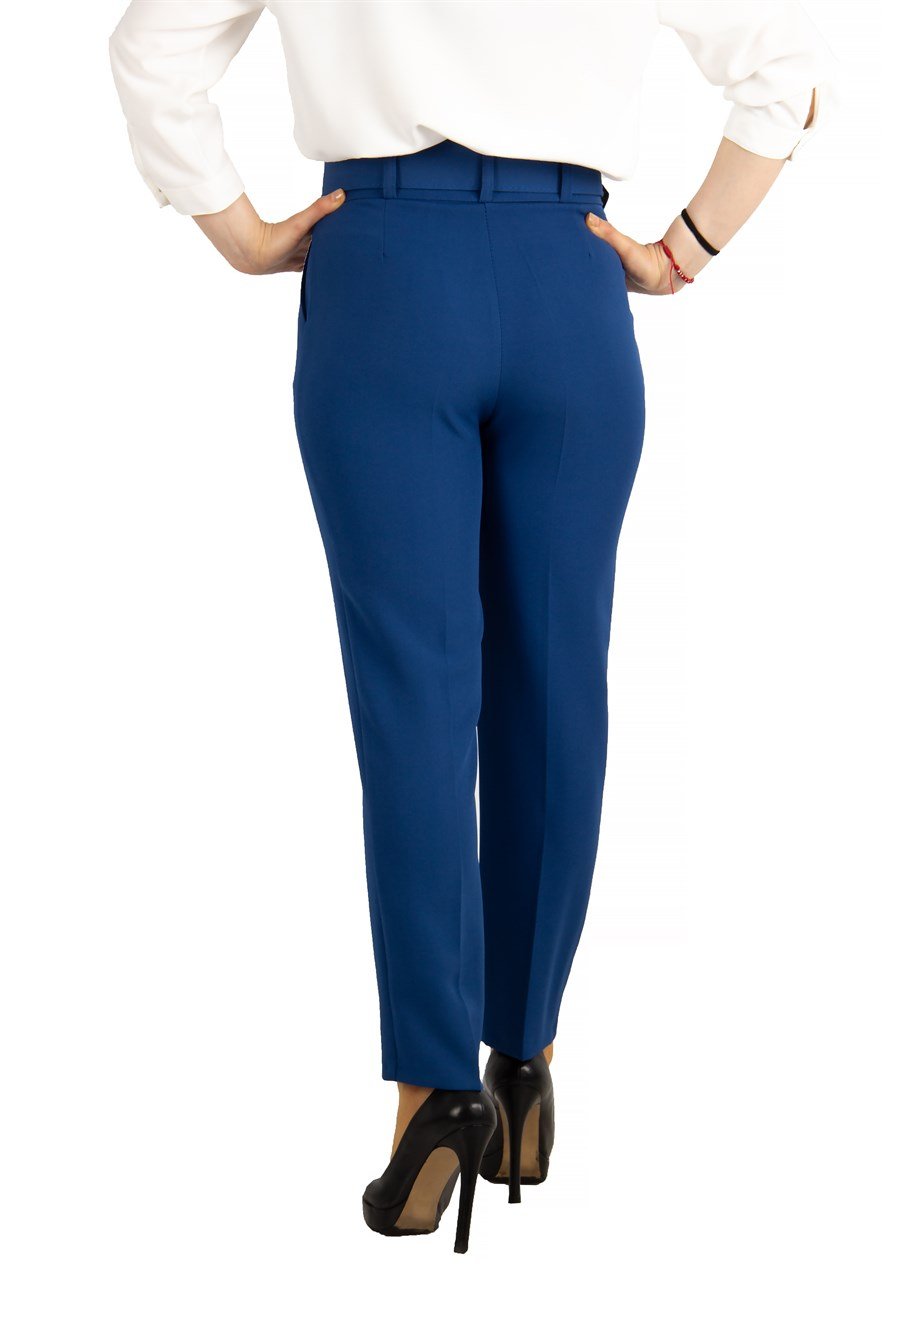 Trousers With Matching Belt Casual Formal Office Pants For Ladies -  Prussian Blue - Wholesale Womens Clothing Vendors For Boutiques